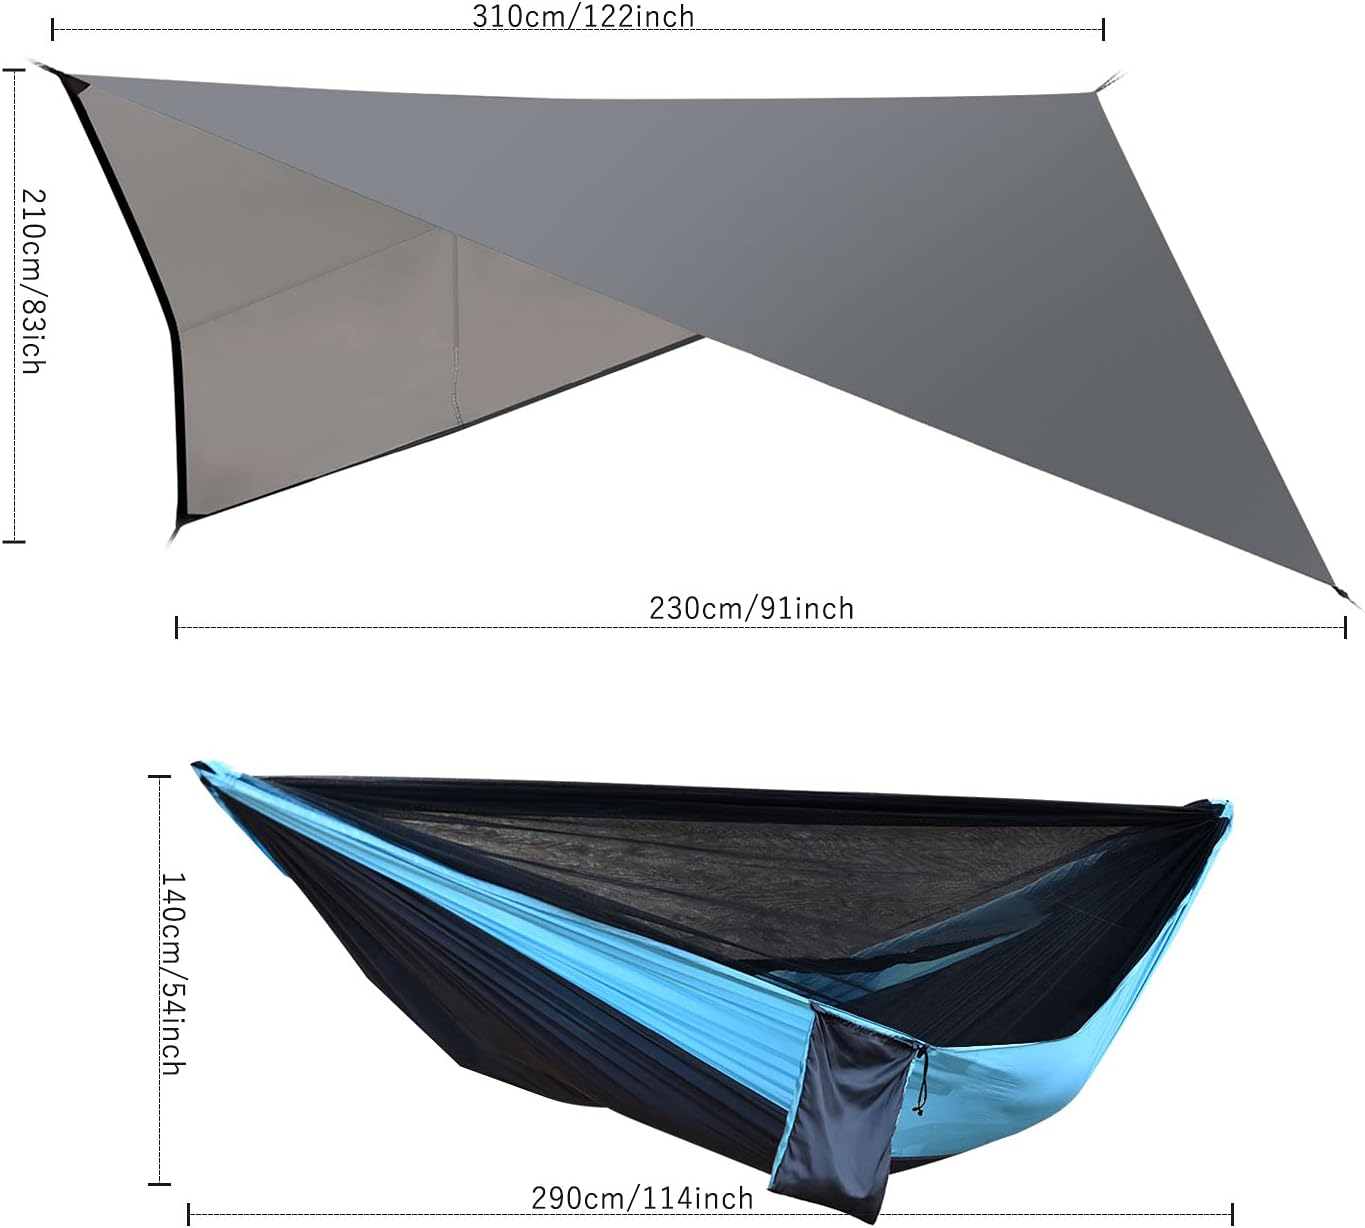 FIRINER Camping Hammock with Rainfly Tarp & Mosquito Net Portable Single Double Hammock Tent with Tree Strap Outdoor Hammock Set for Backpacking, Outdoor & Hiking